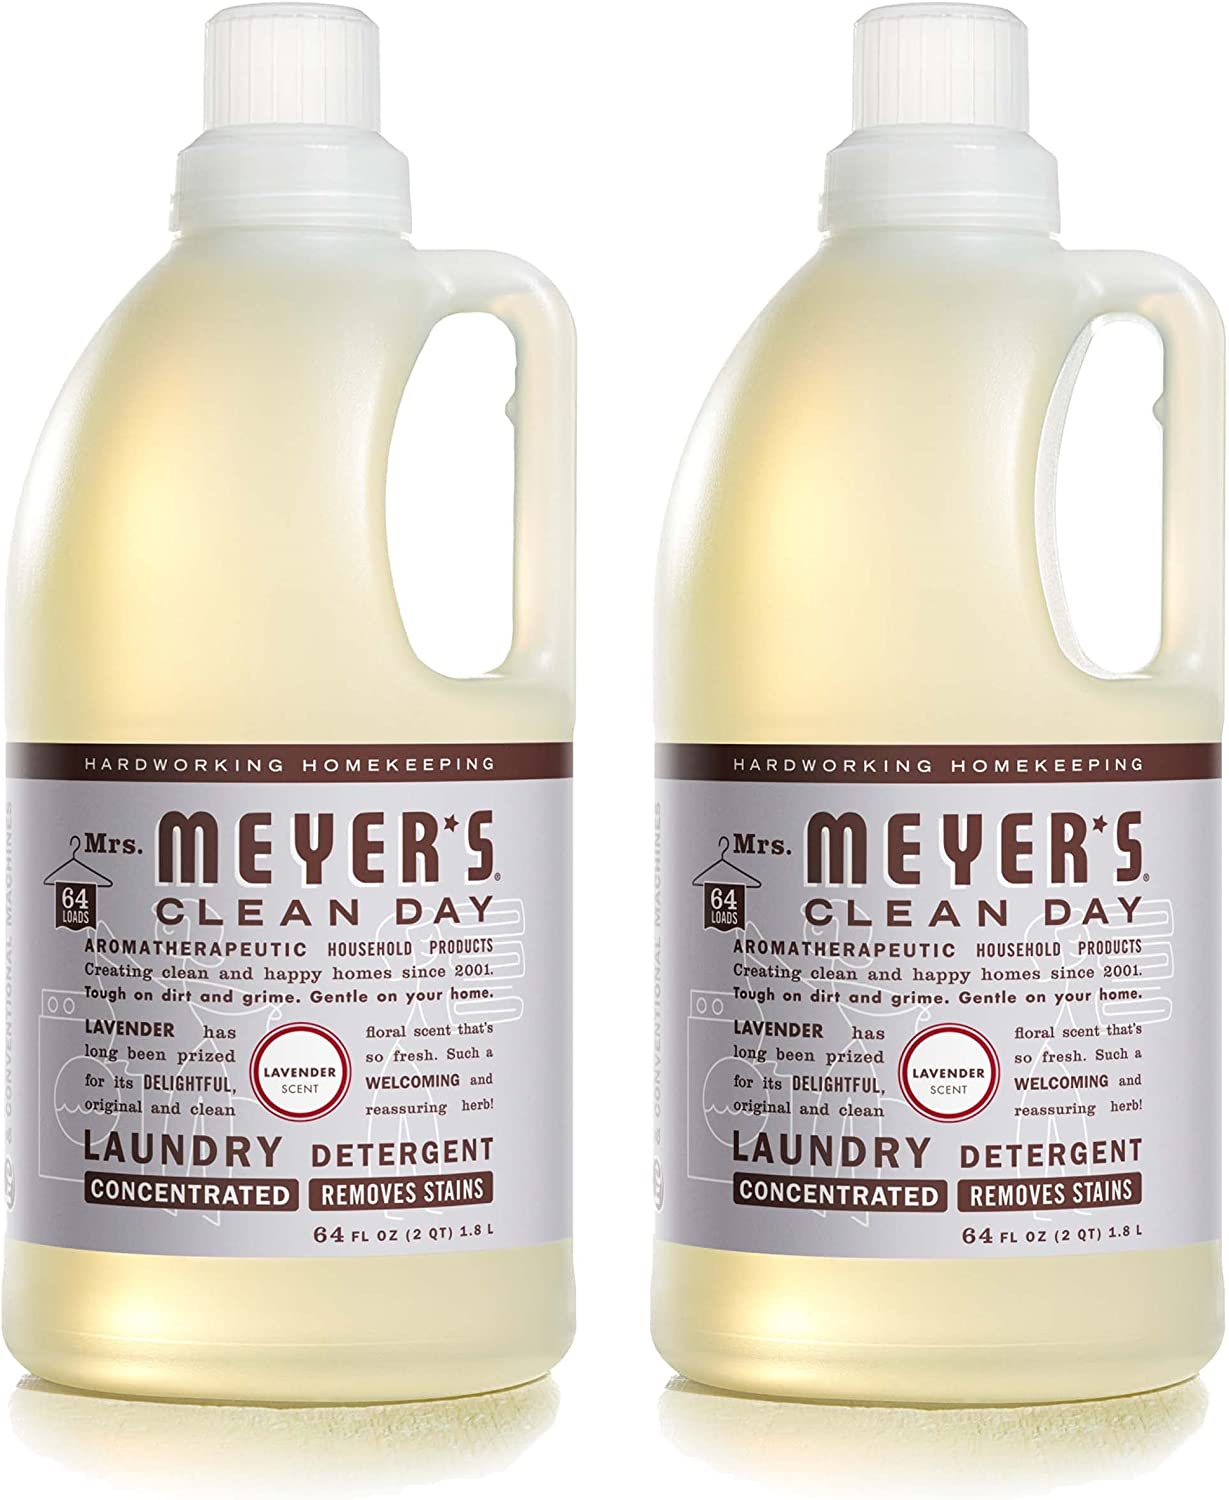 Mrs. Meyer’s Clean Day High Efficiency Laundry Detergent, 2-Pack